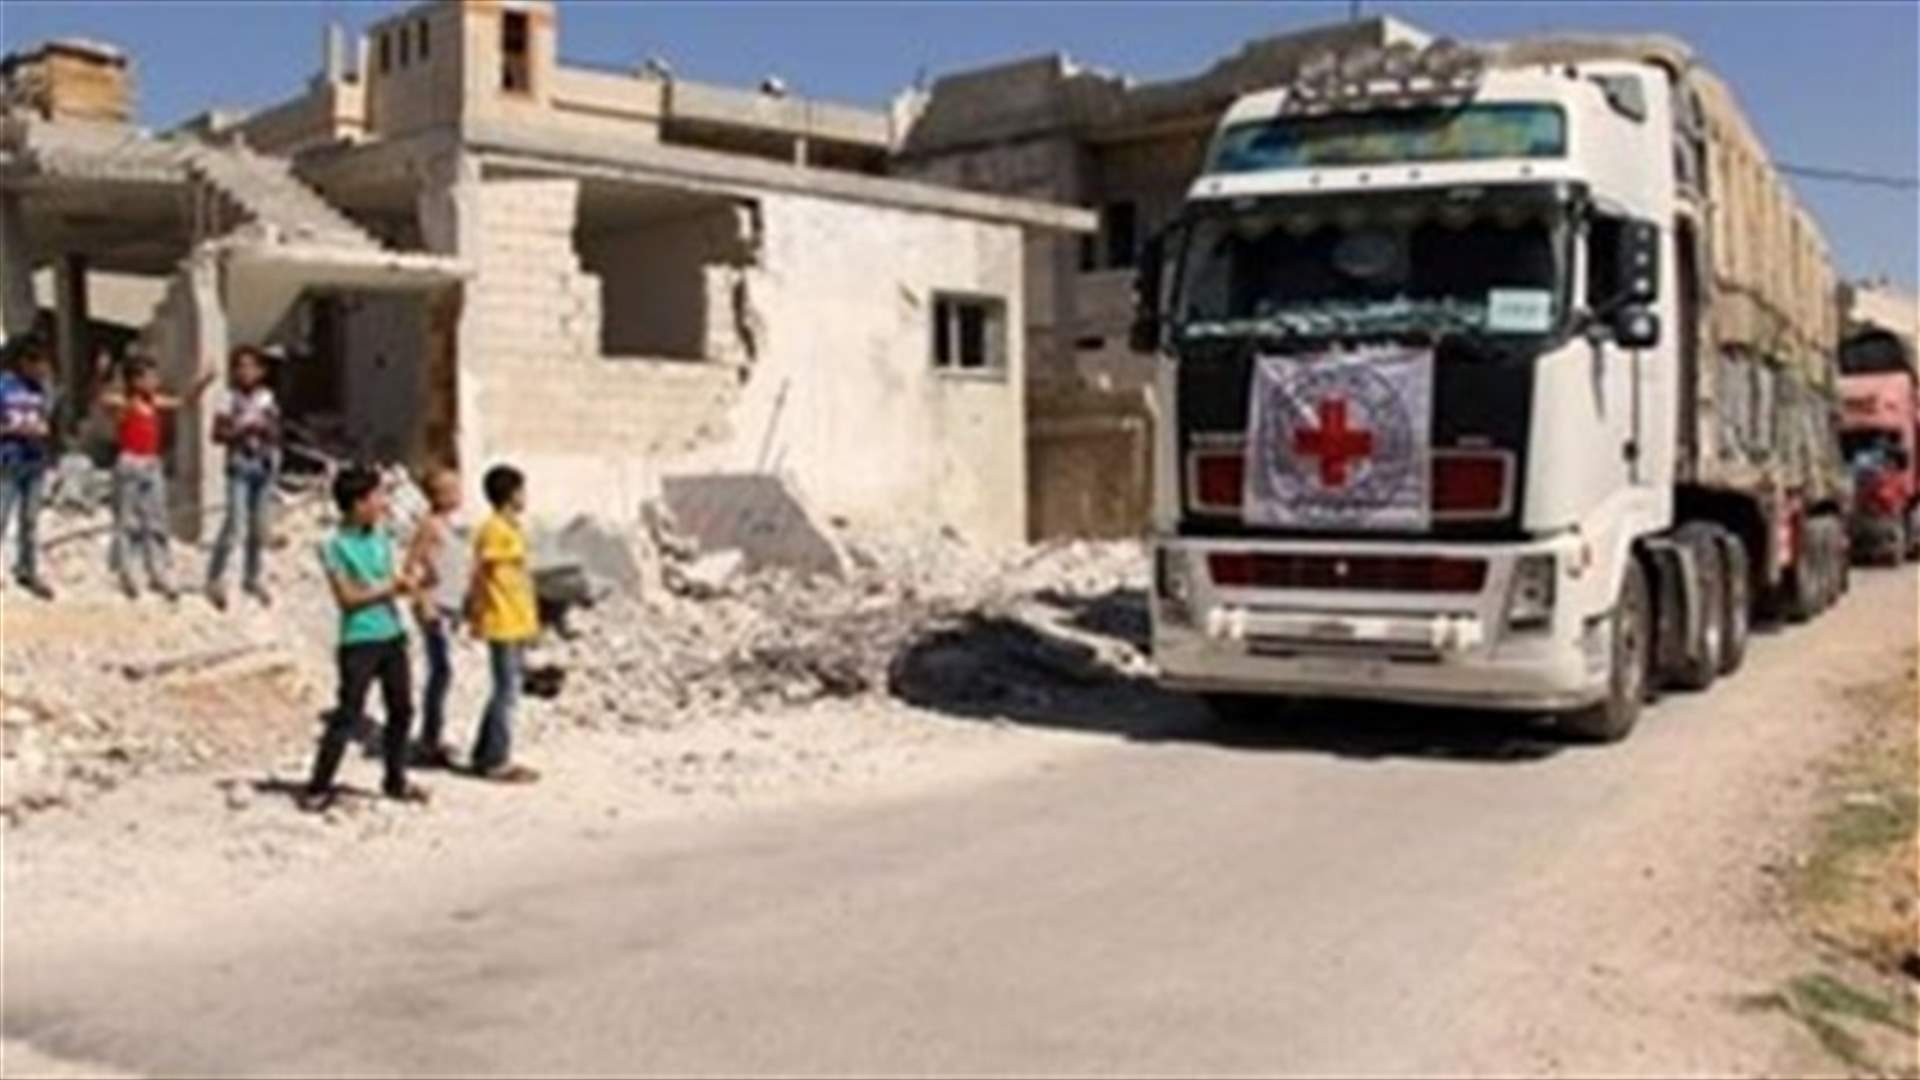 Aid delivered to four besieged towns in Syria - ICRC